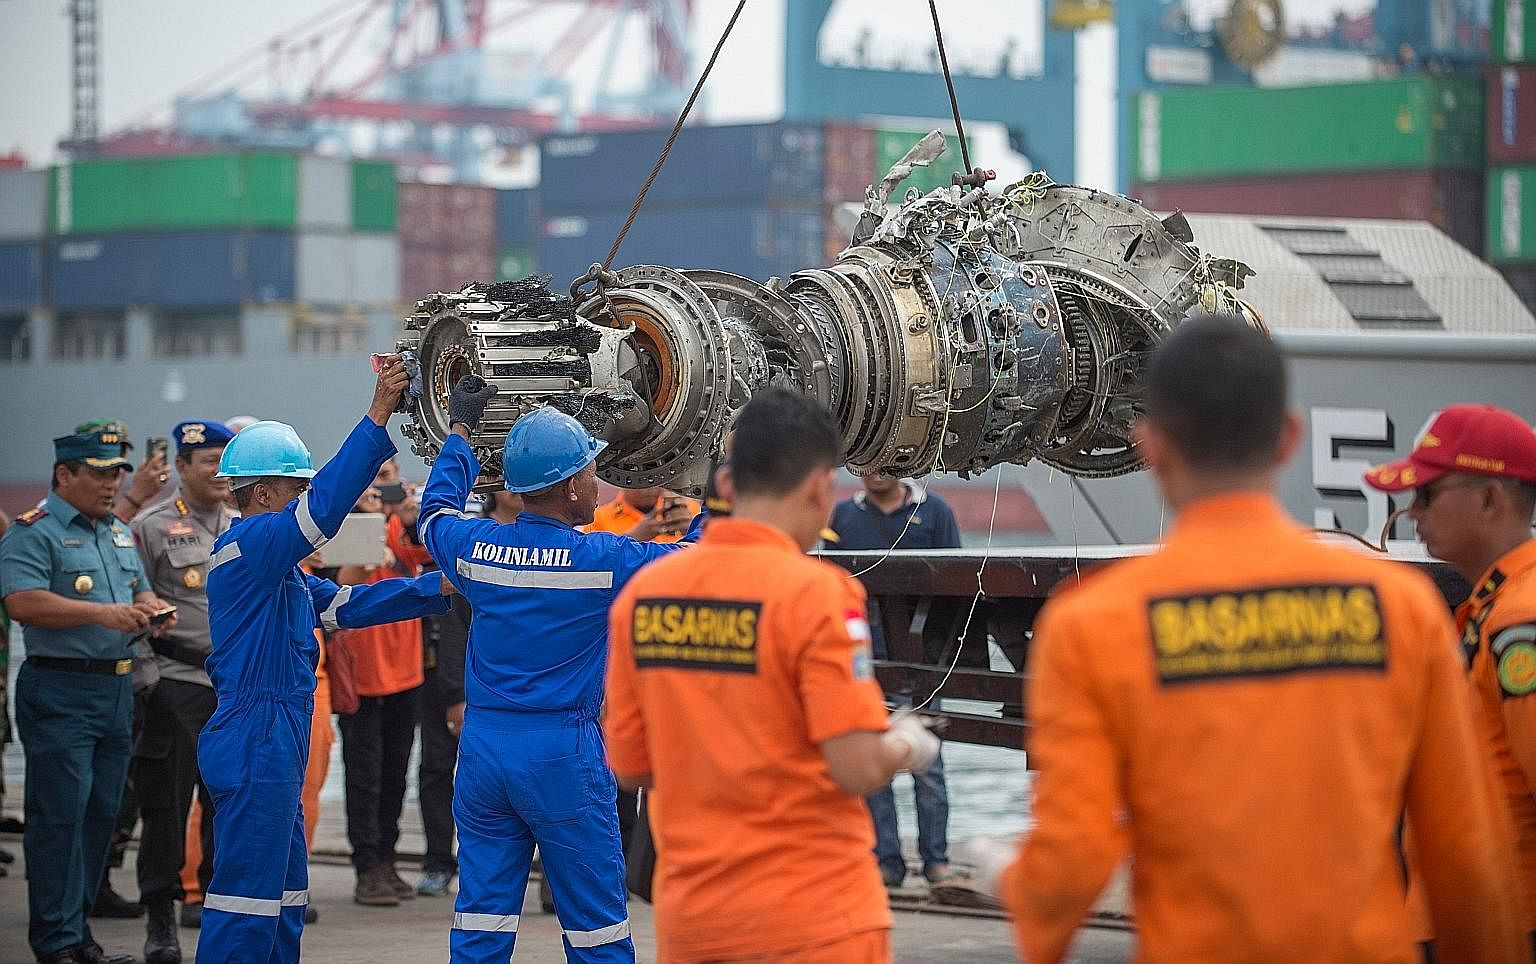 Indonesian rescue personnel unloading a recovered engine yesterday from the ill-fated Lion Air Flight JT610 at a port in Jakarta. As of yesterday, a total of 105 body bags had been recovered and handed to police for forensic identification.